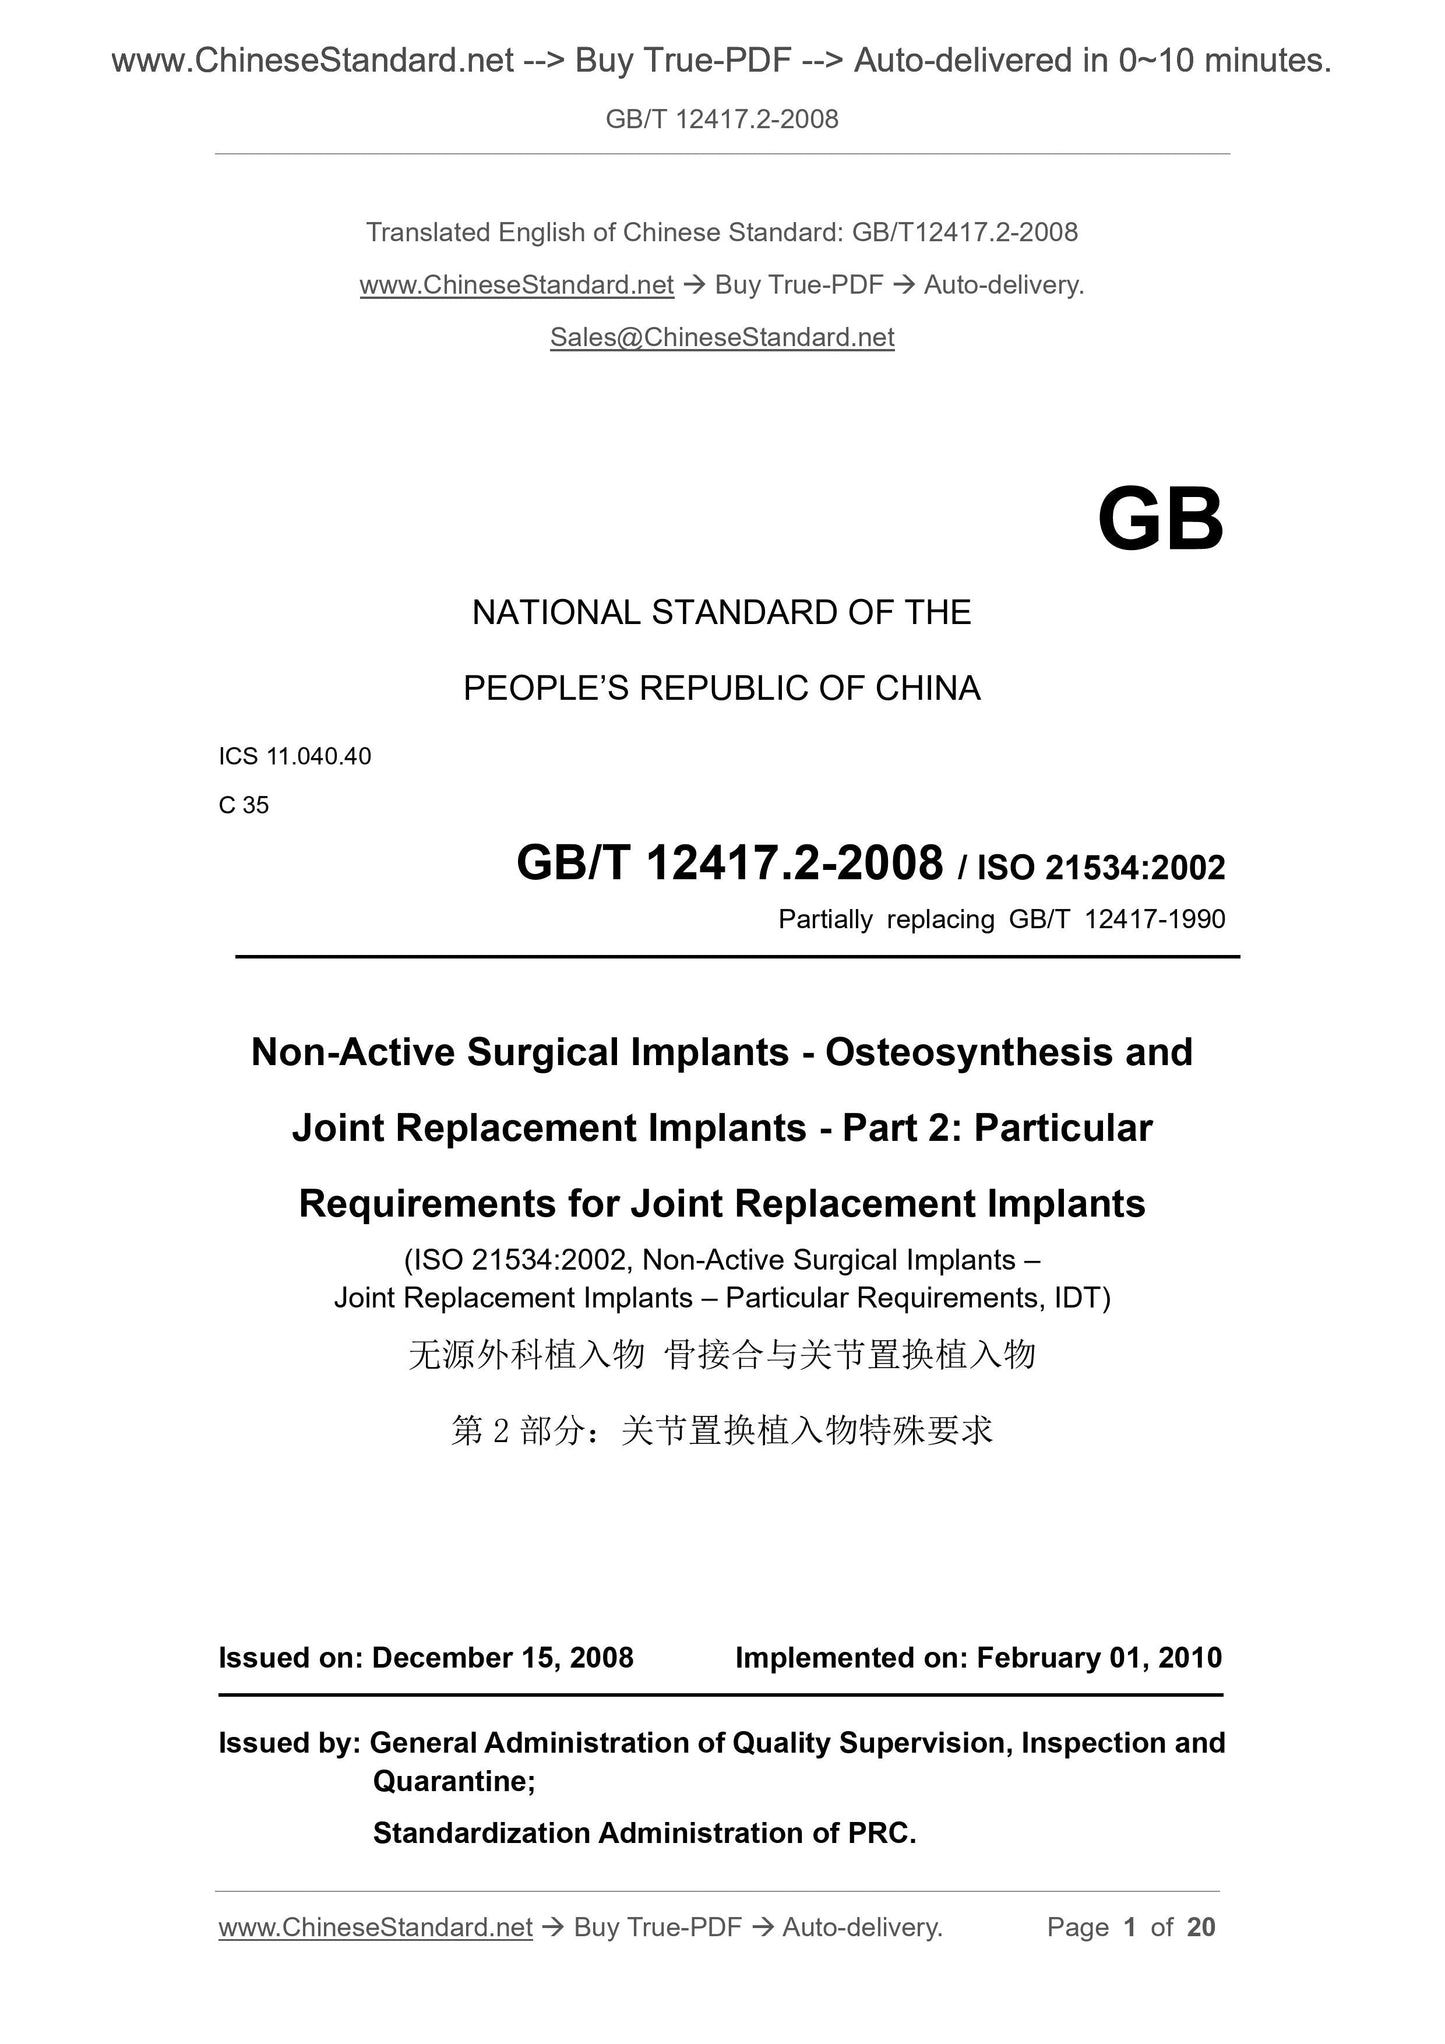 GB/T 12417.2-2008 Page 1